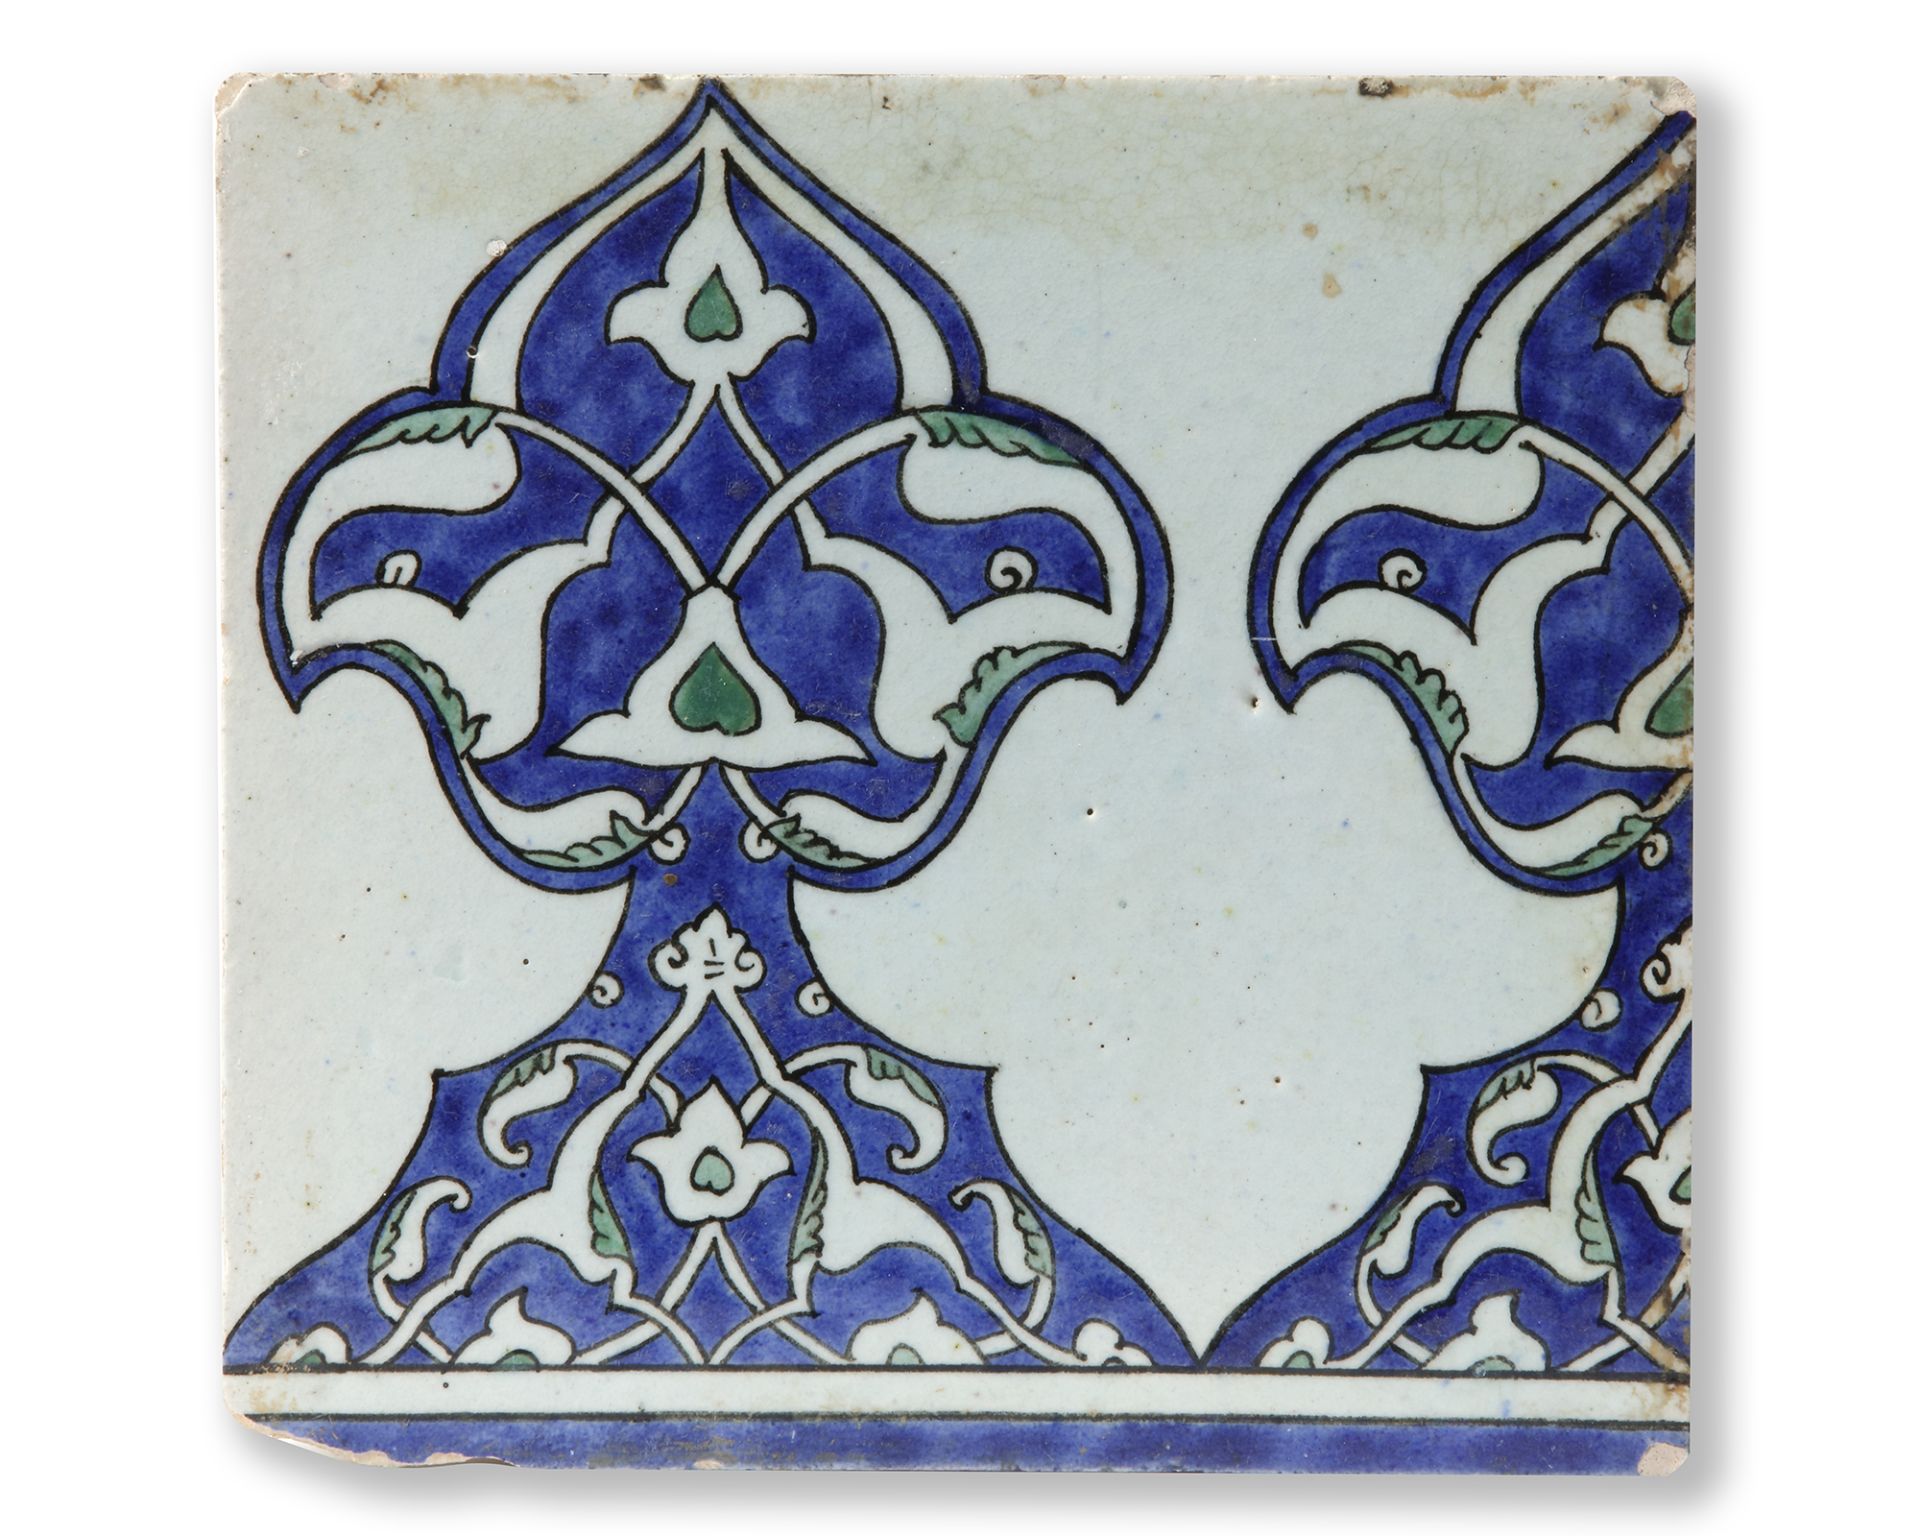 A PAIR OF DAMASCUS UNDERGLAZE PAINTED POTTERY BORDER TILES, SYRIA, 17TH CENTURY - Image 2 of 6